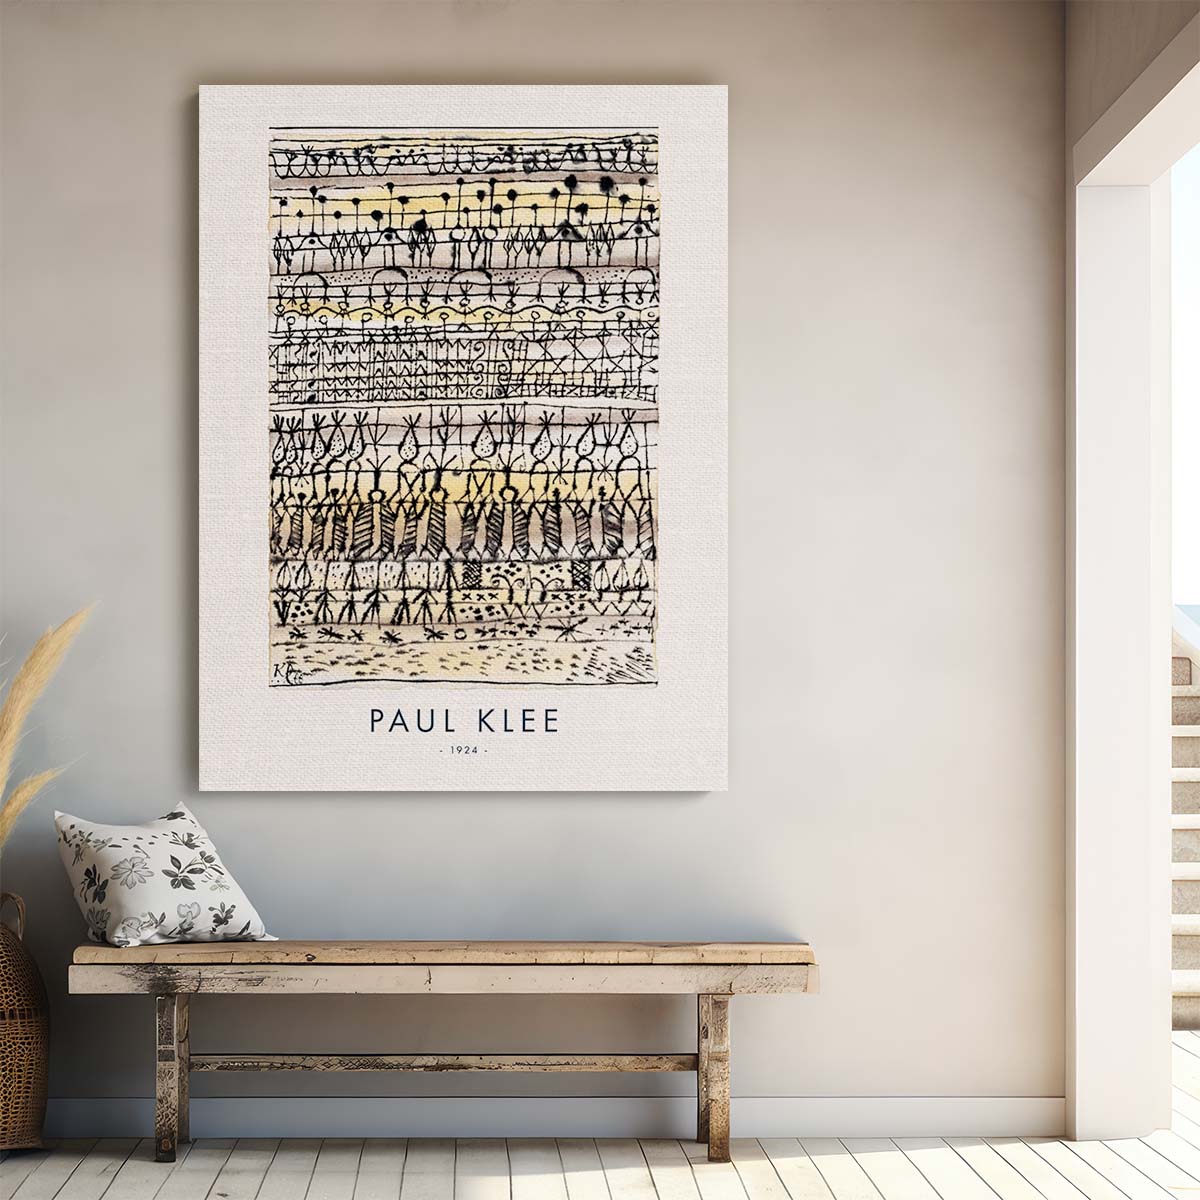 Paul Klee's 1924 Watercolor Illustration, Garden Abstract Art by Luxuriance Designs, made in USA